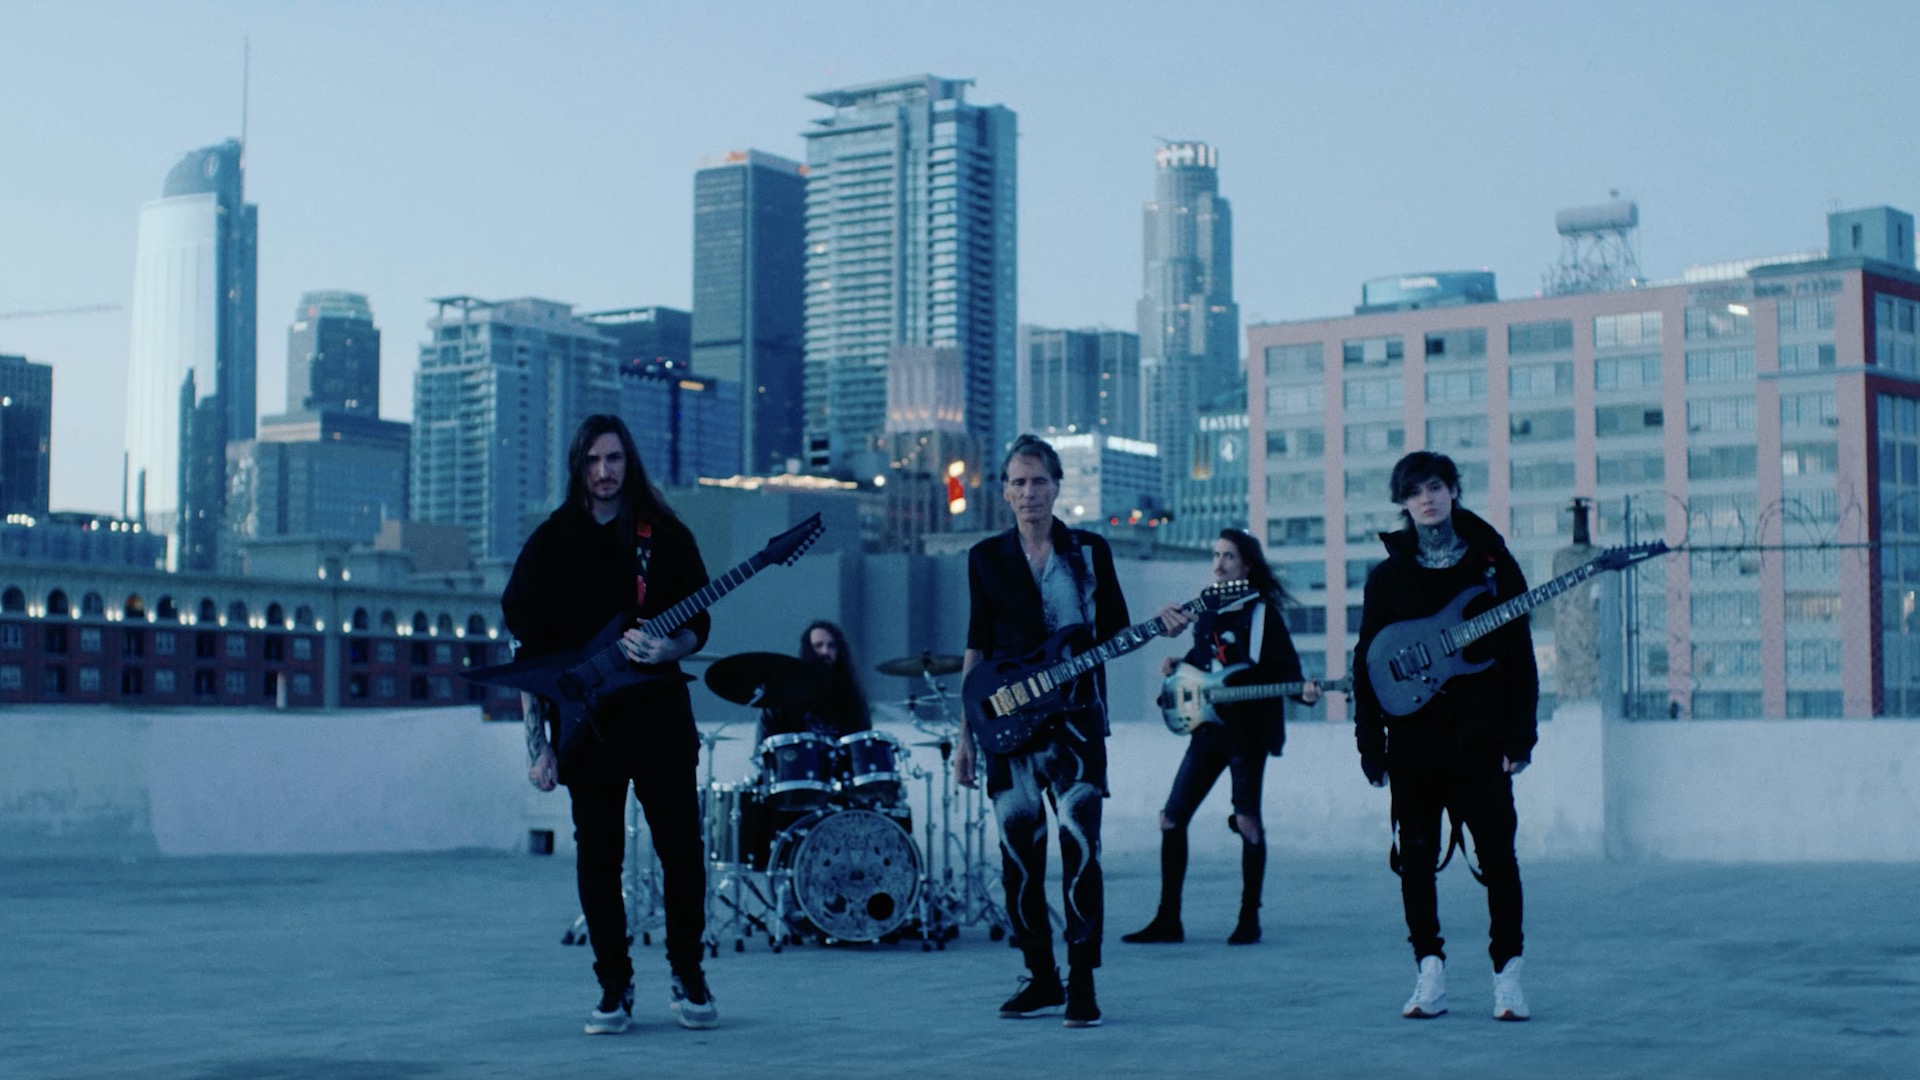 Steve Vai and Polyphia filming Ego Death music video